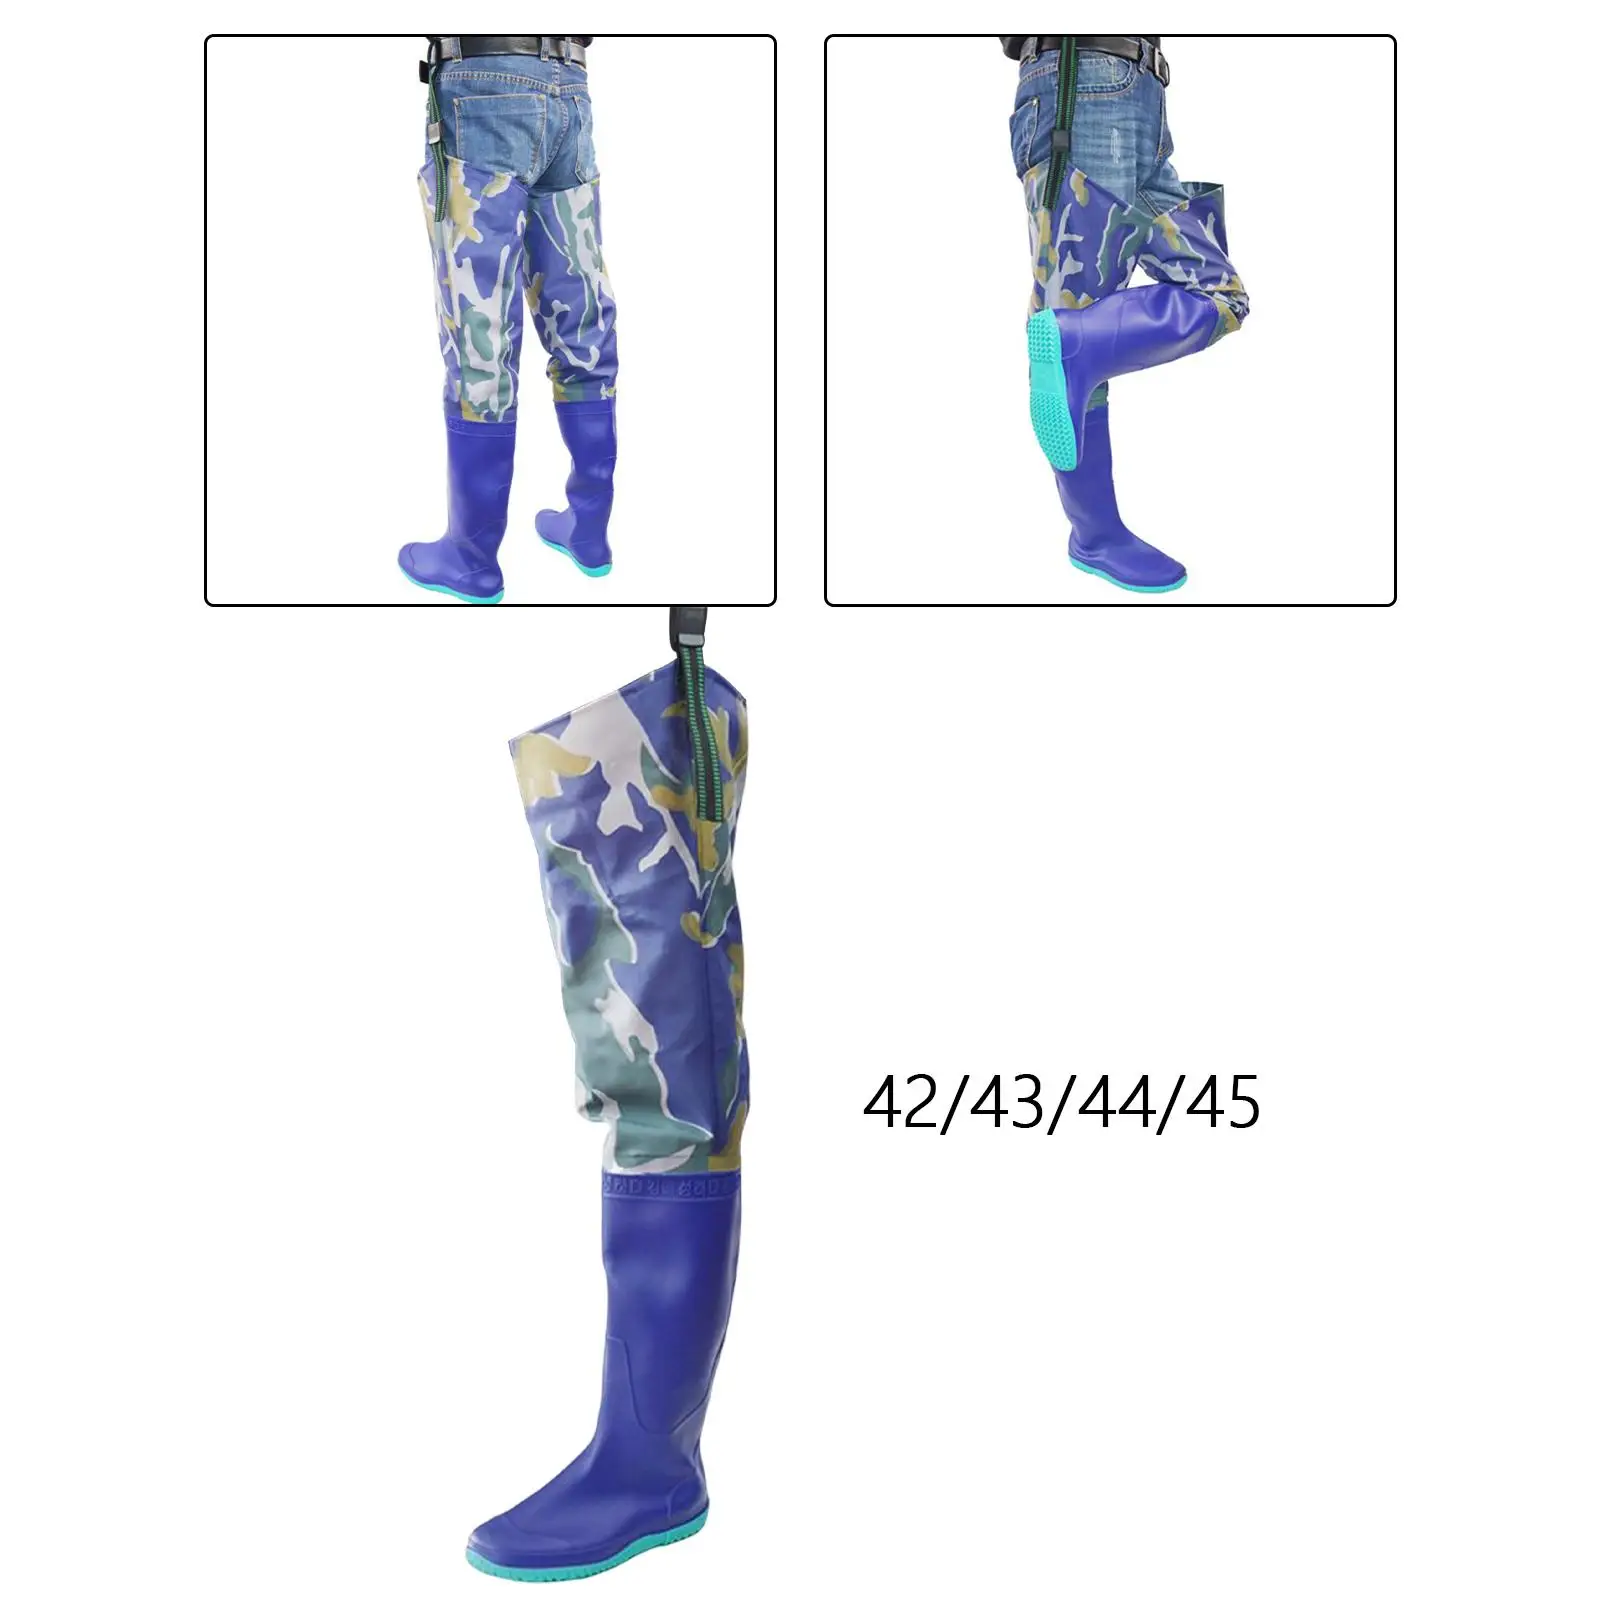 Hip Waders Waterproof Wading Hip Boots Lightweight for Men Women Bootfoot Wading Trousers for Fly Fishing Muck Work Gardening